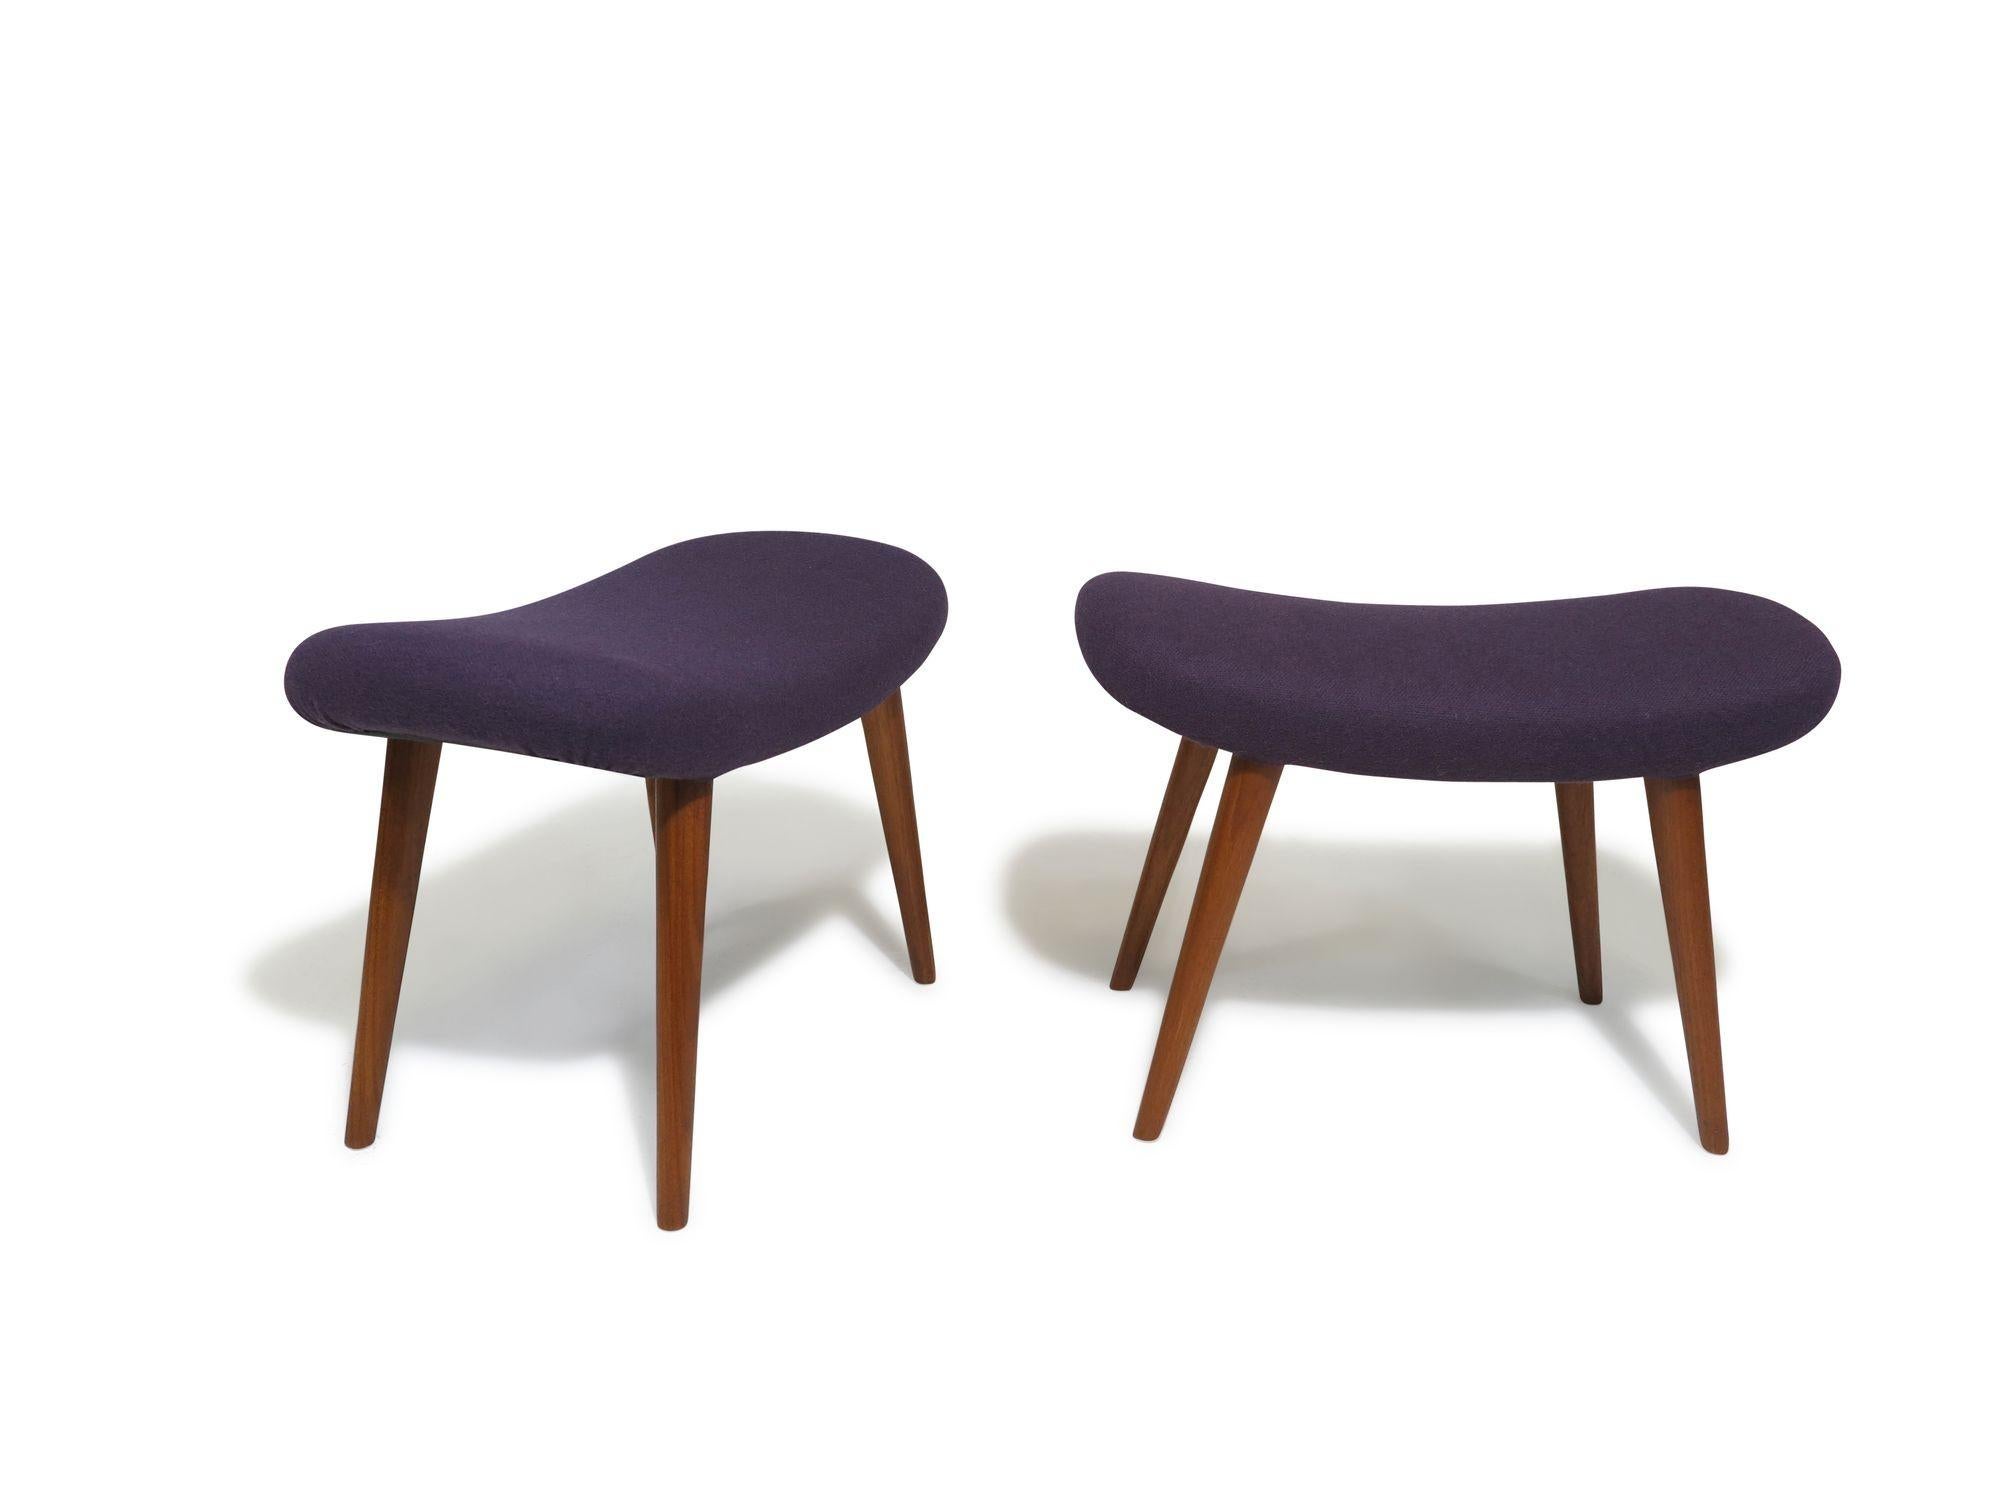 Mid-century ottomans designed by Aksel Bender Madsen in 1955, Denmark. Crafted with curved oval seats and raised on tapered teak legs, these ottomans have been newly upholstered in purple wool. They can be used as ottomans or stools. Fully restored,